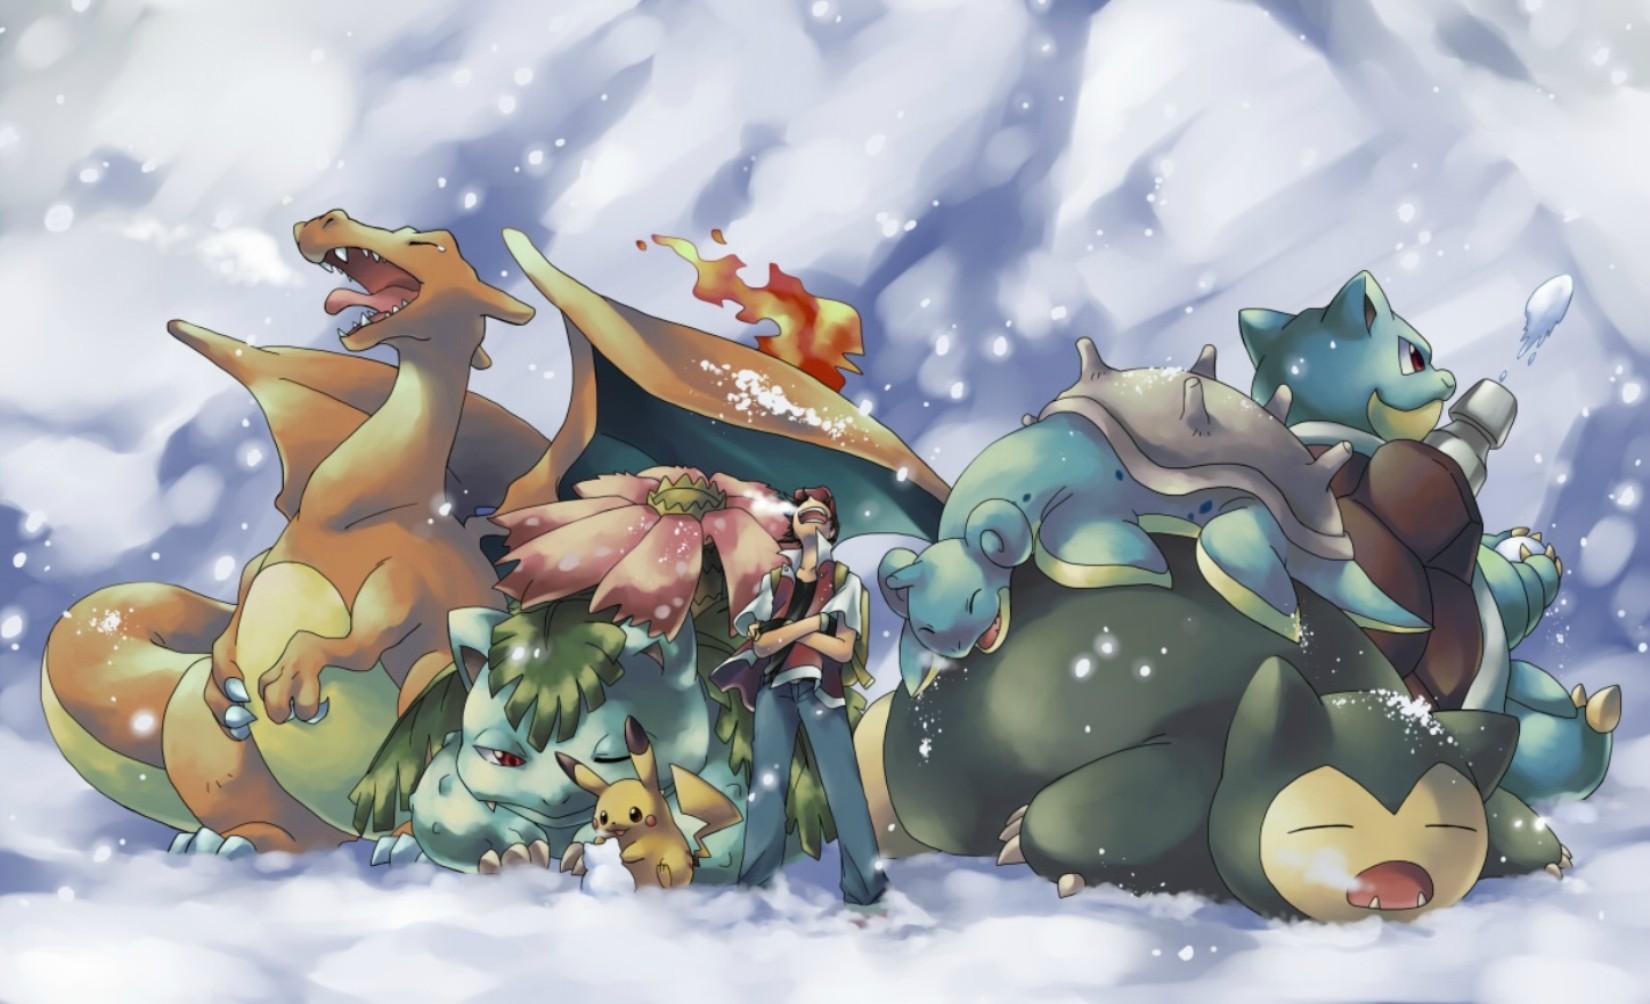 What are your favorite Pokemon wallpaper?